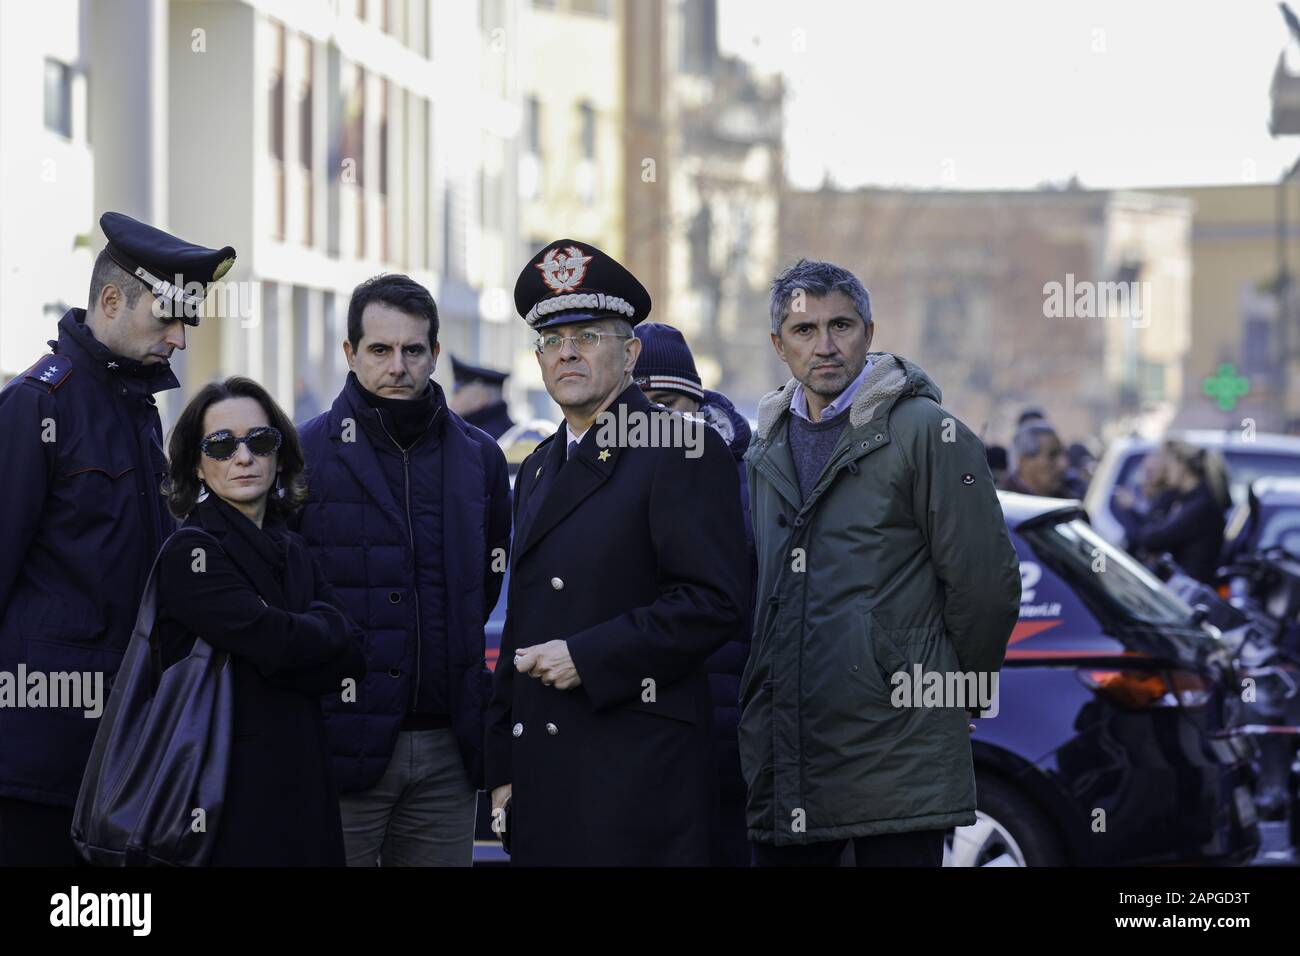 Naples, CAMPANIA, ITALY. 23rd Jan, 2020. Naples, 23/01/2020 - in the Miano district in the northern suburbs of Naples, the Camorra returns to spare and kills a victim of the Lo Russo clan. The victim's name is Stefano Bocchetti, killed last night in a game room with many 9-gauge pistol shots, investigating the investigators. Credit: Fabio Sasso/ZUMA Wire/Alamy Live News Stock Photo